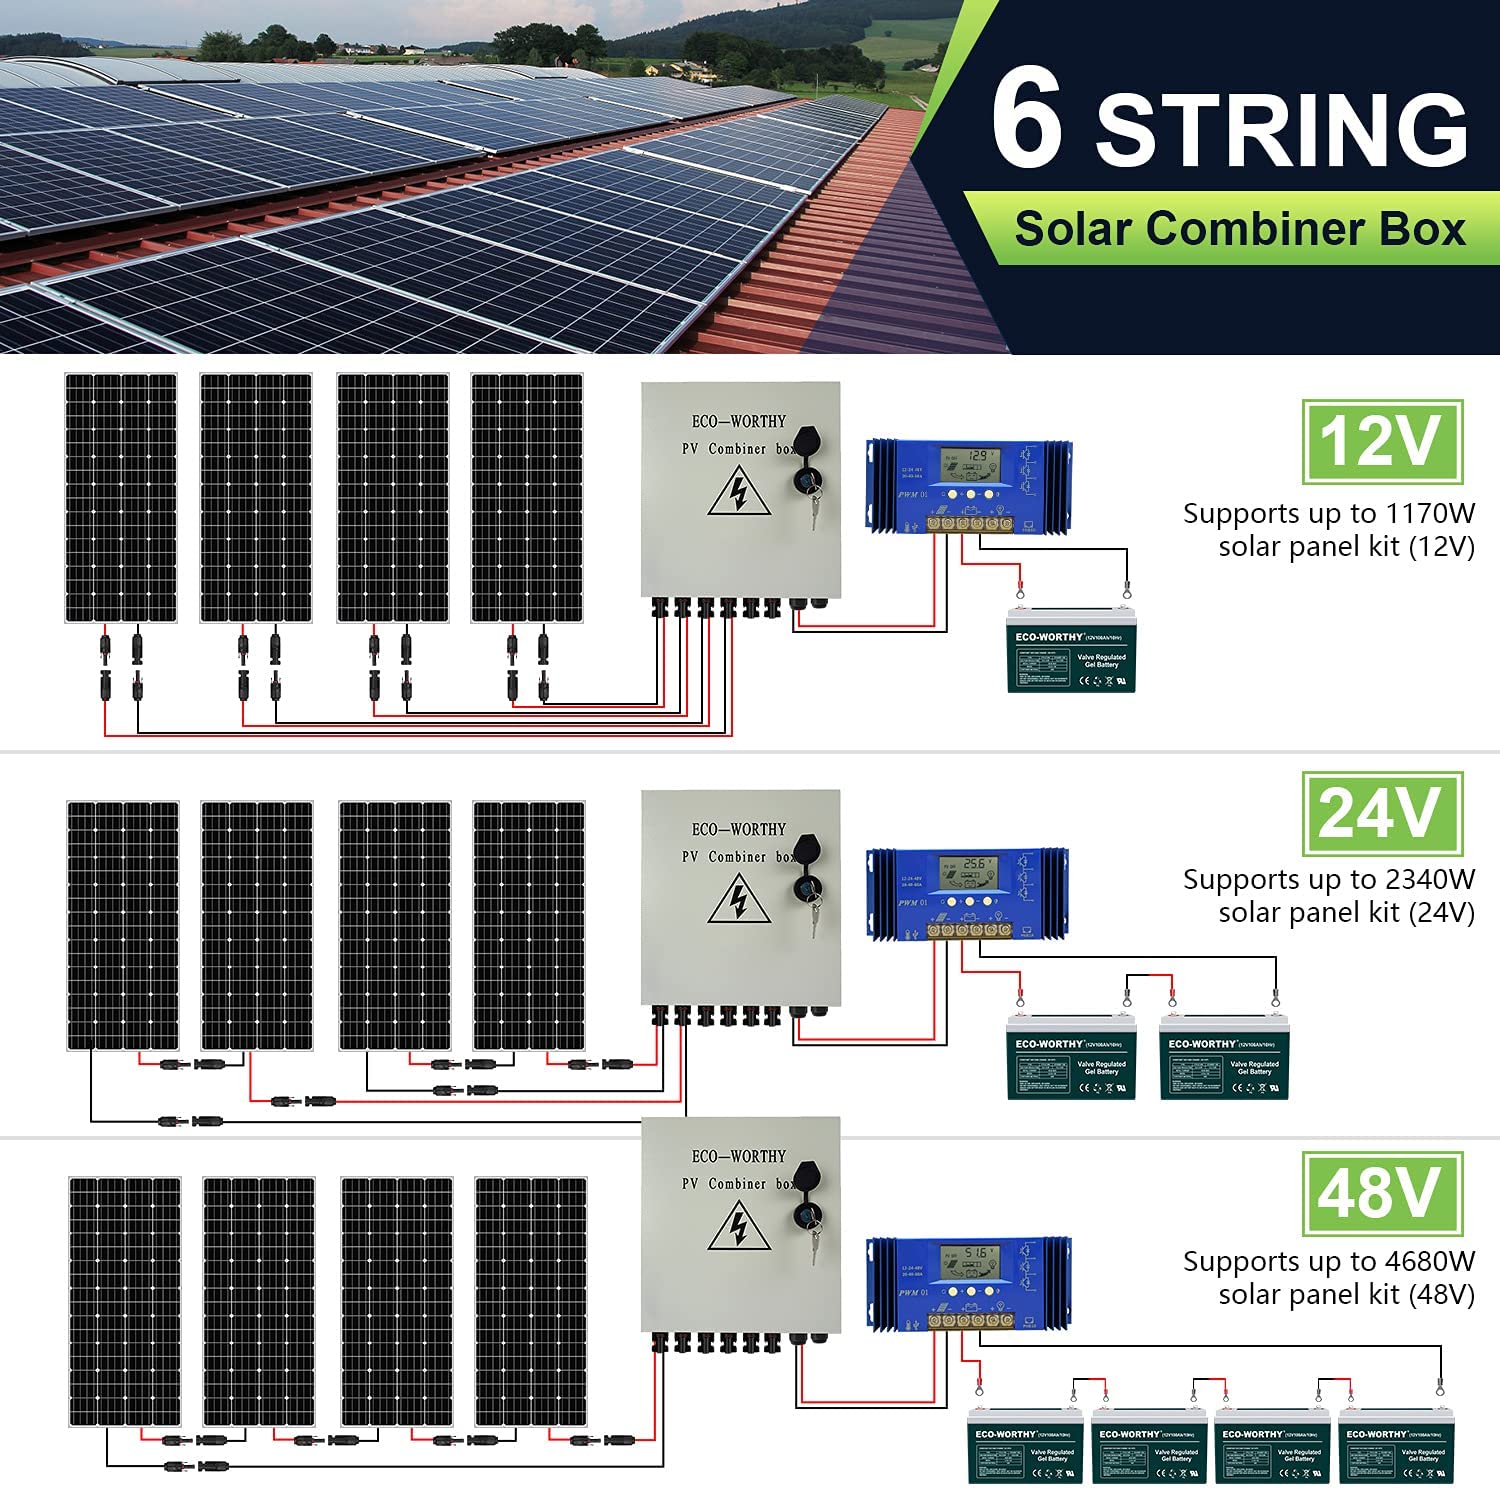 ECO-WORTHY 6 String PV Combiner Box & 63A Circuit Breakers for